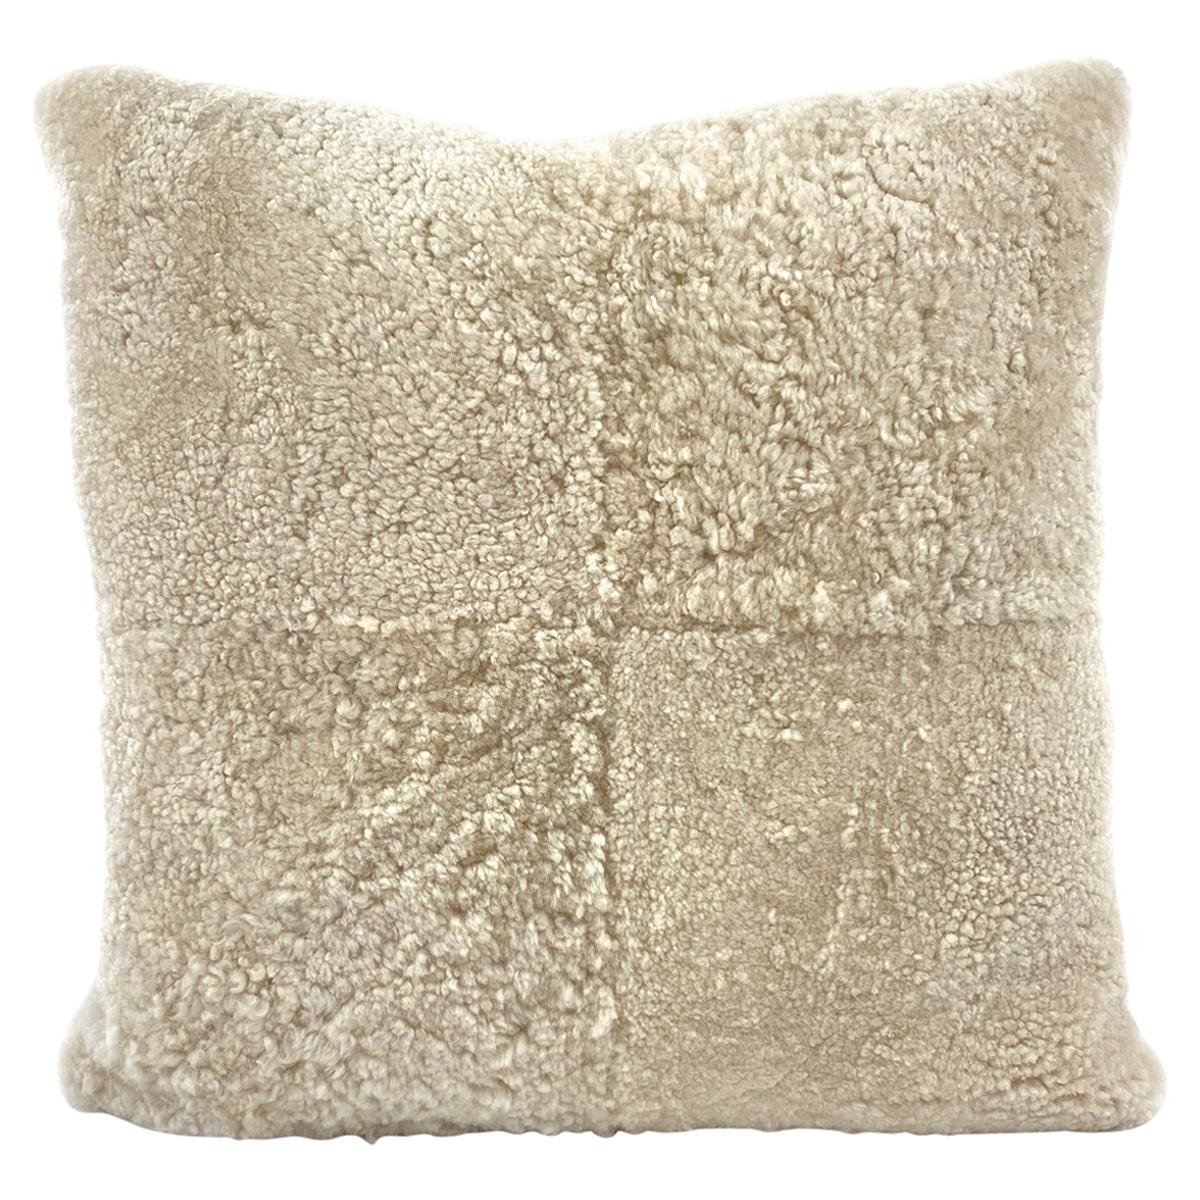 Large Shearling Pillow - Euro 24x24"  60x60cm For Sale